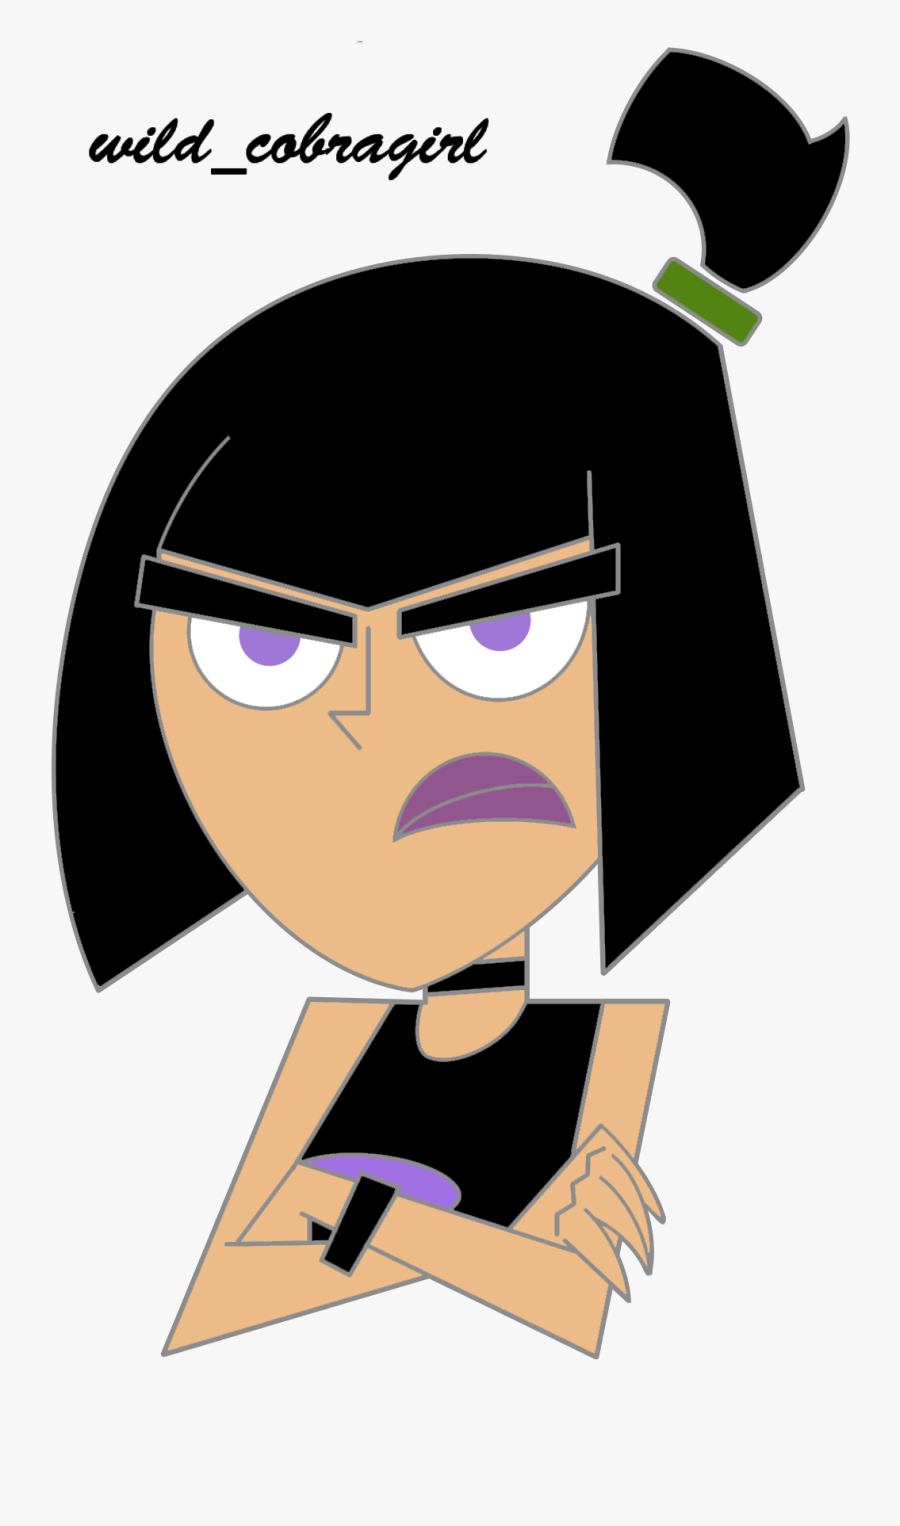 Angry Girl Png Jpg - Girls Angry Cartoon Images Png, Transparent Clipart